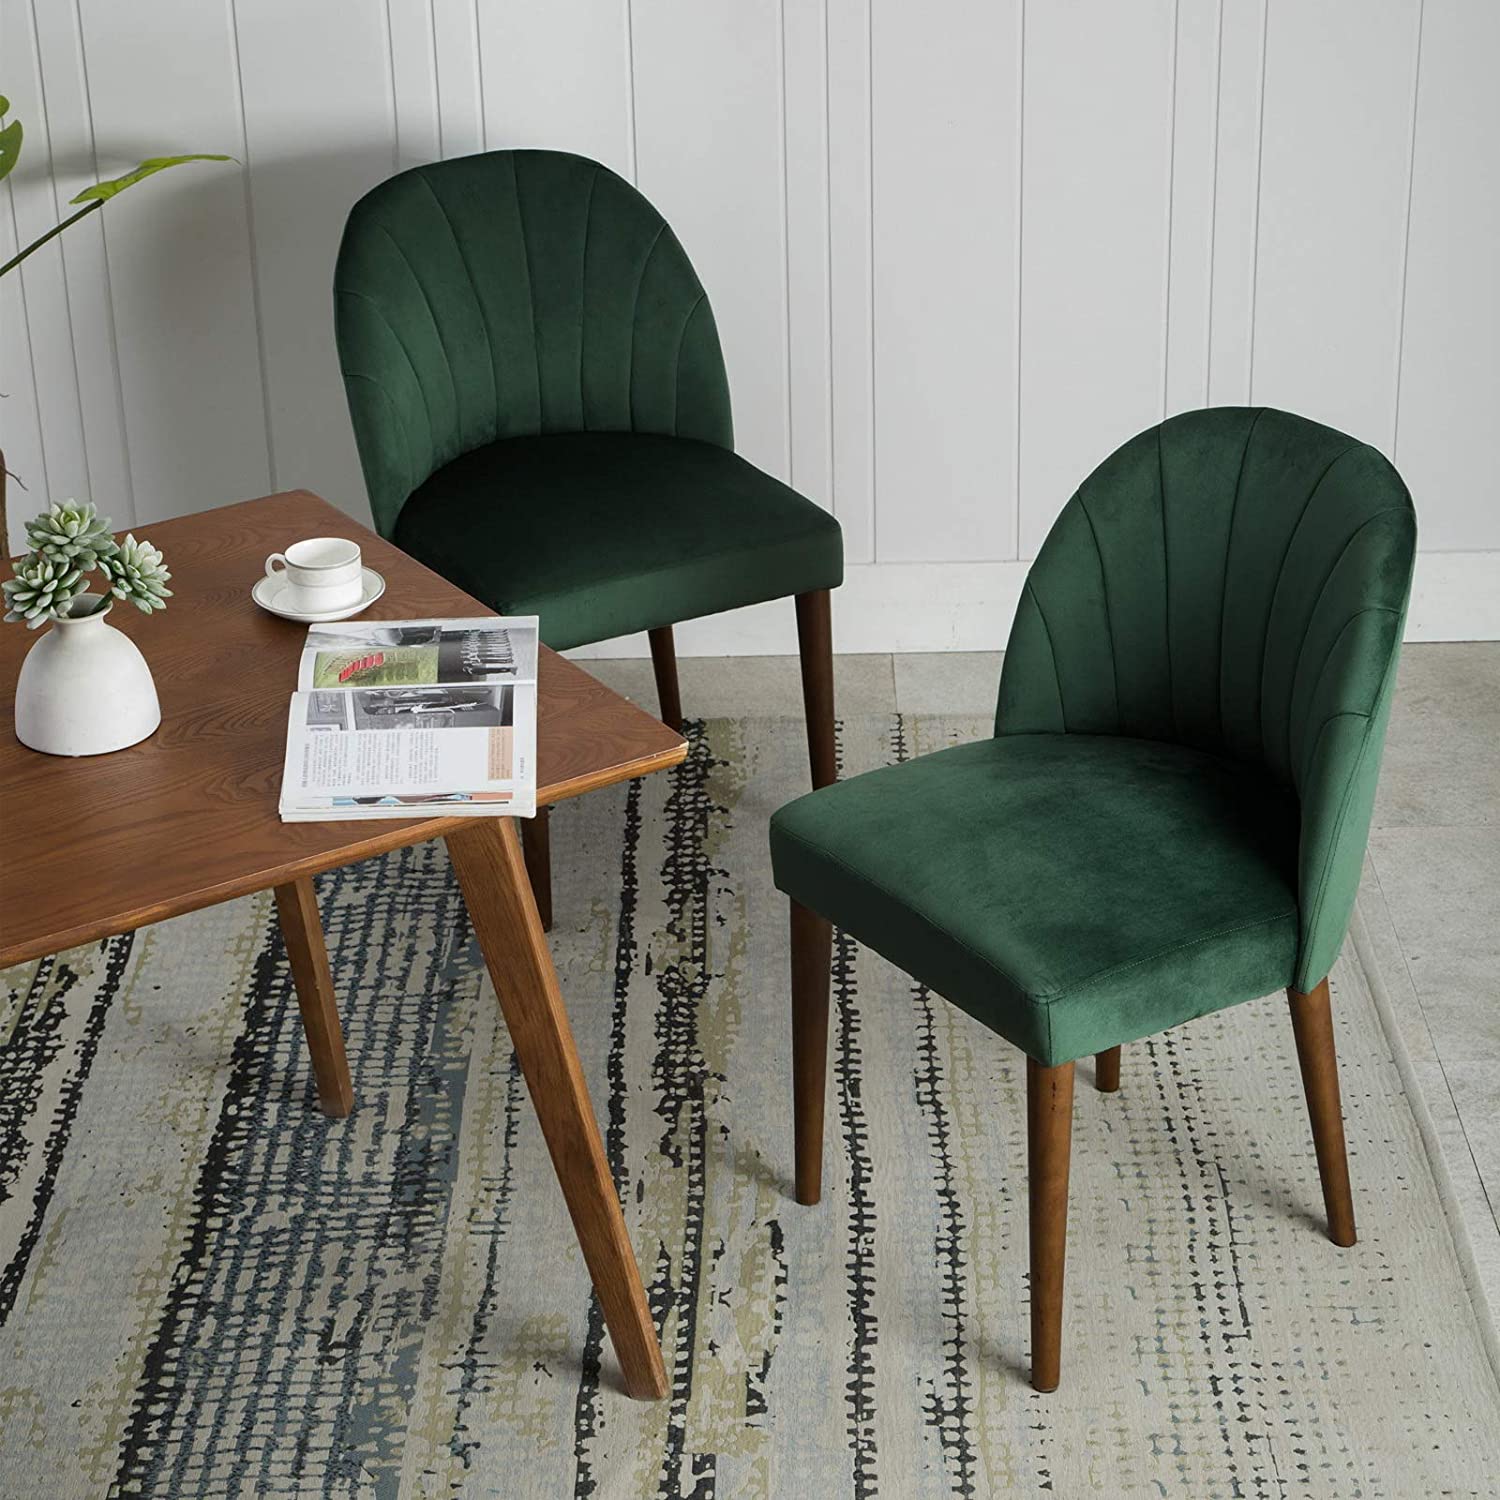 Retro Upholstered Dining Room Chairs, Green Upholstered Dining Room Chairs